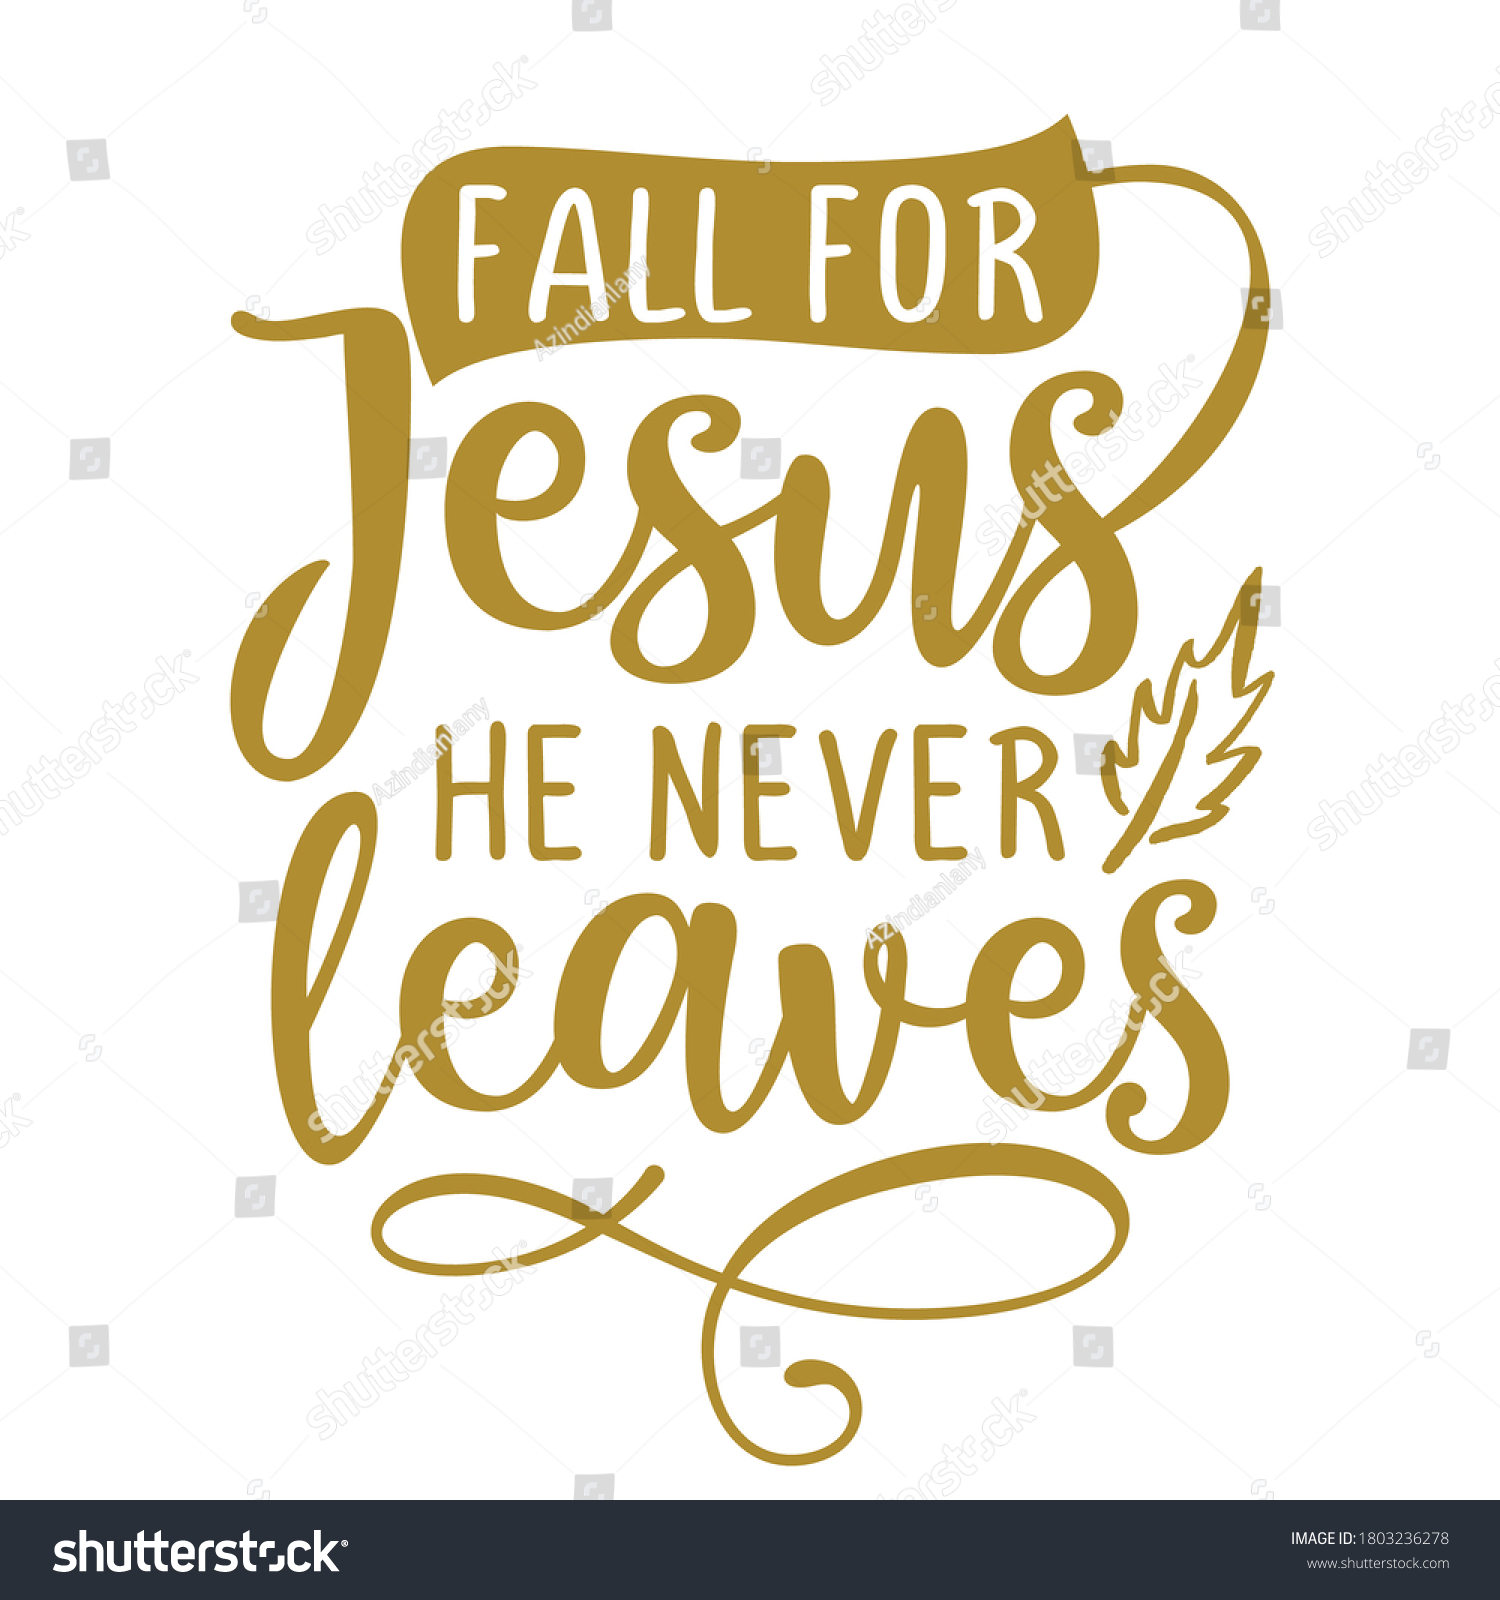 Fall Jesus He Never Leaves Inspirational Stock Vector (Royalty Free) ...